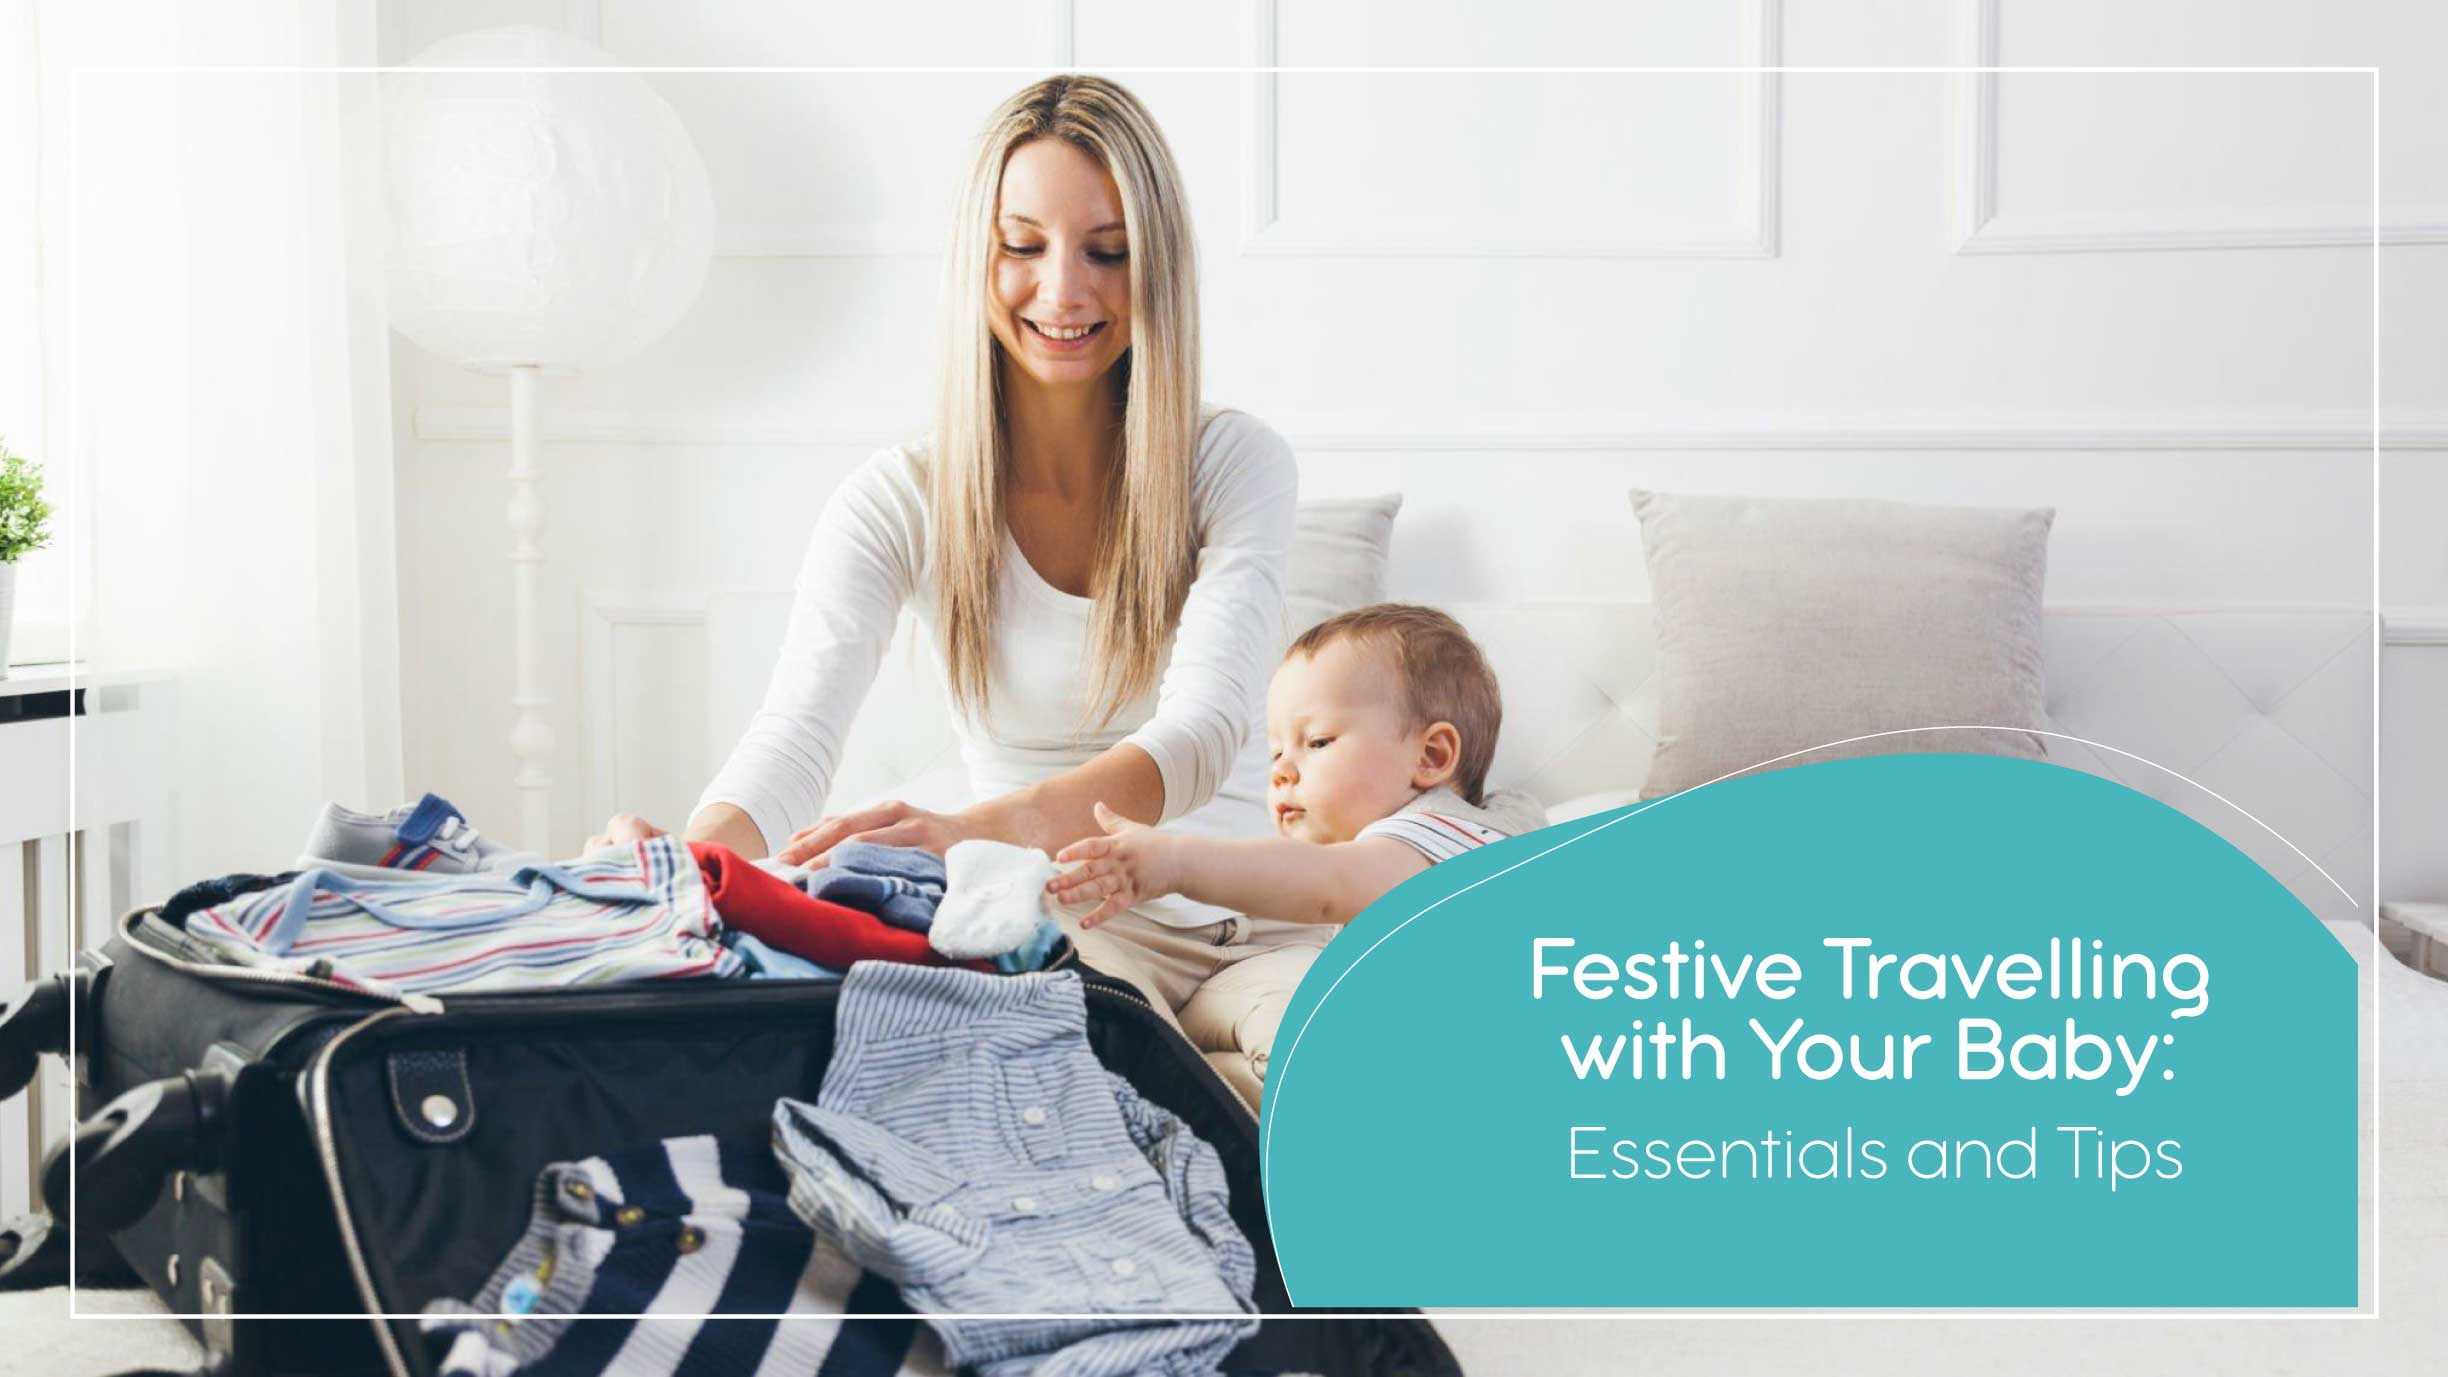 Festive Travelling with Your Baby: Essentials and Tips